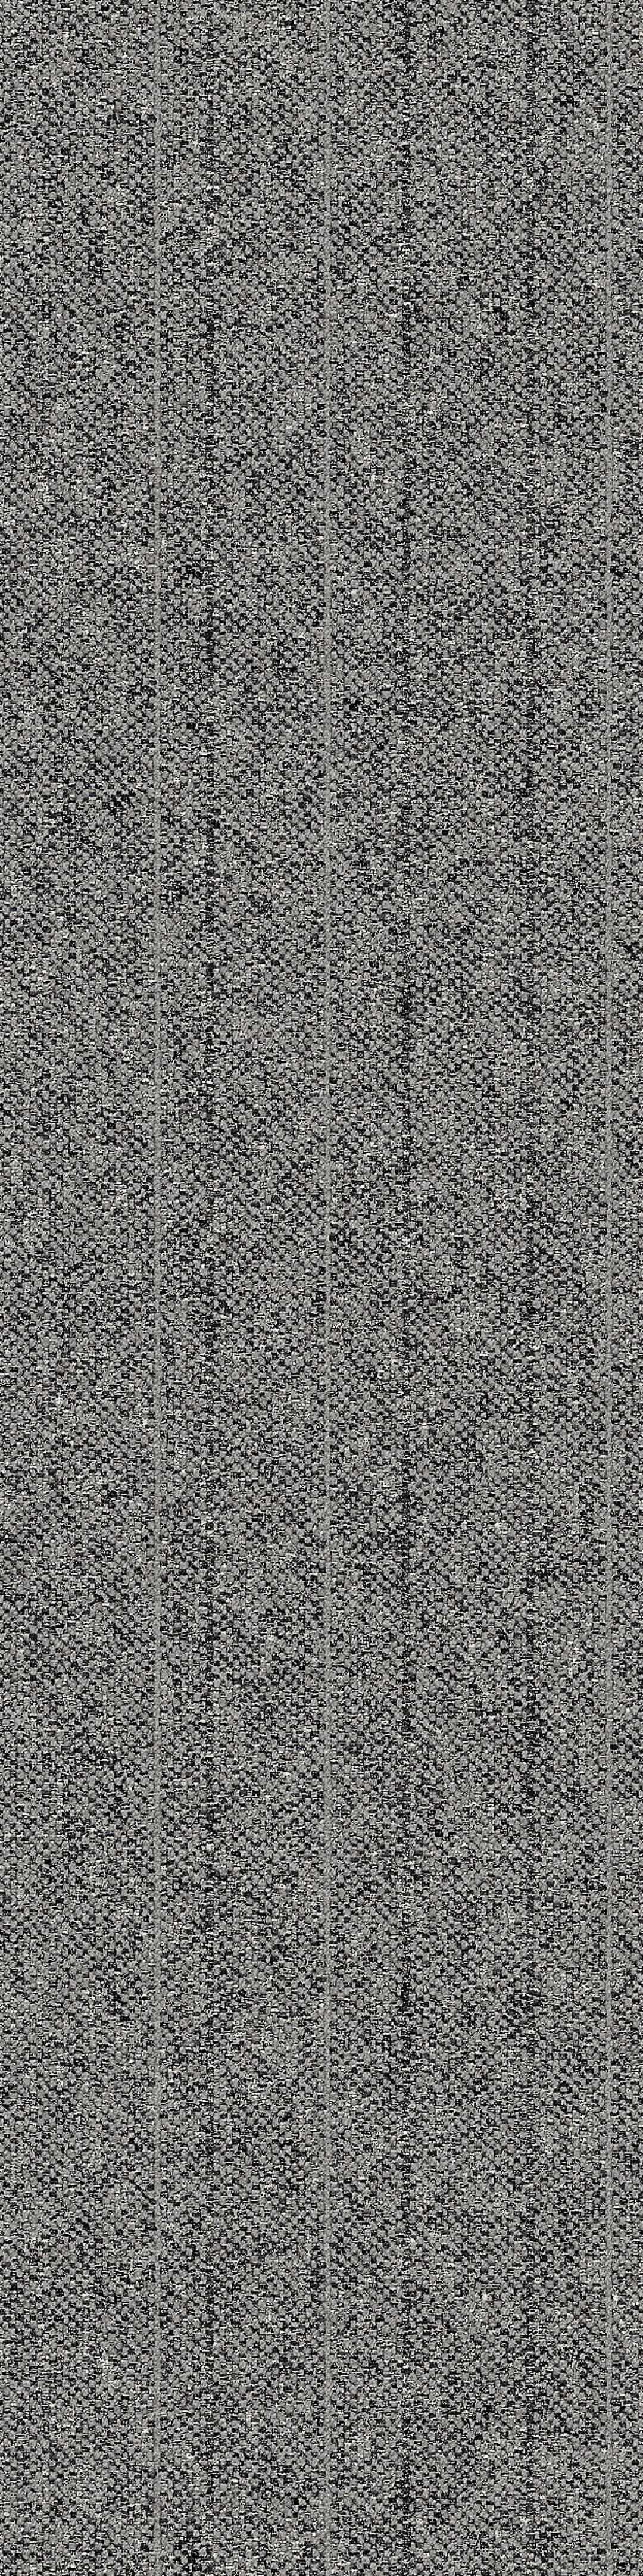 World Woven - WW860 - Flannel Tweed from Inzide